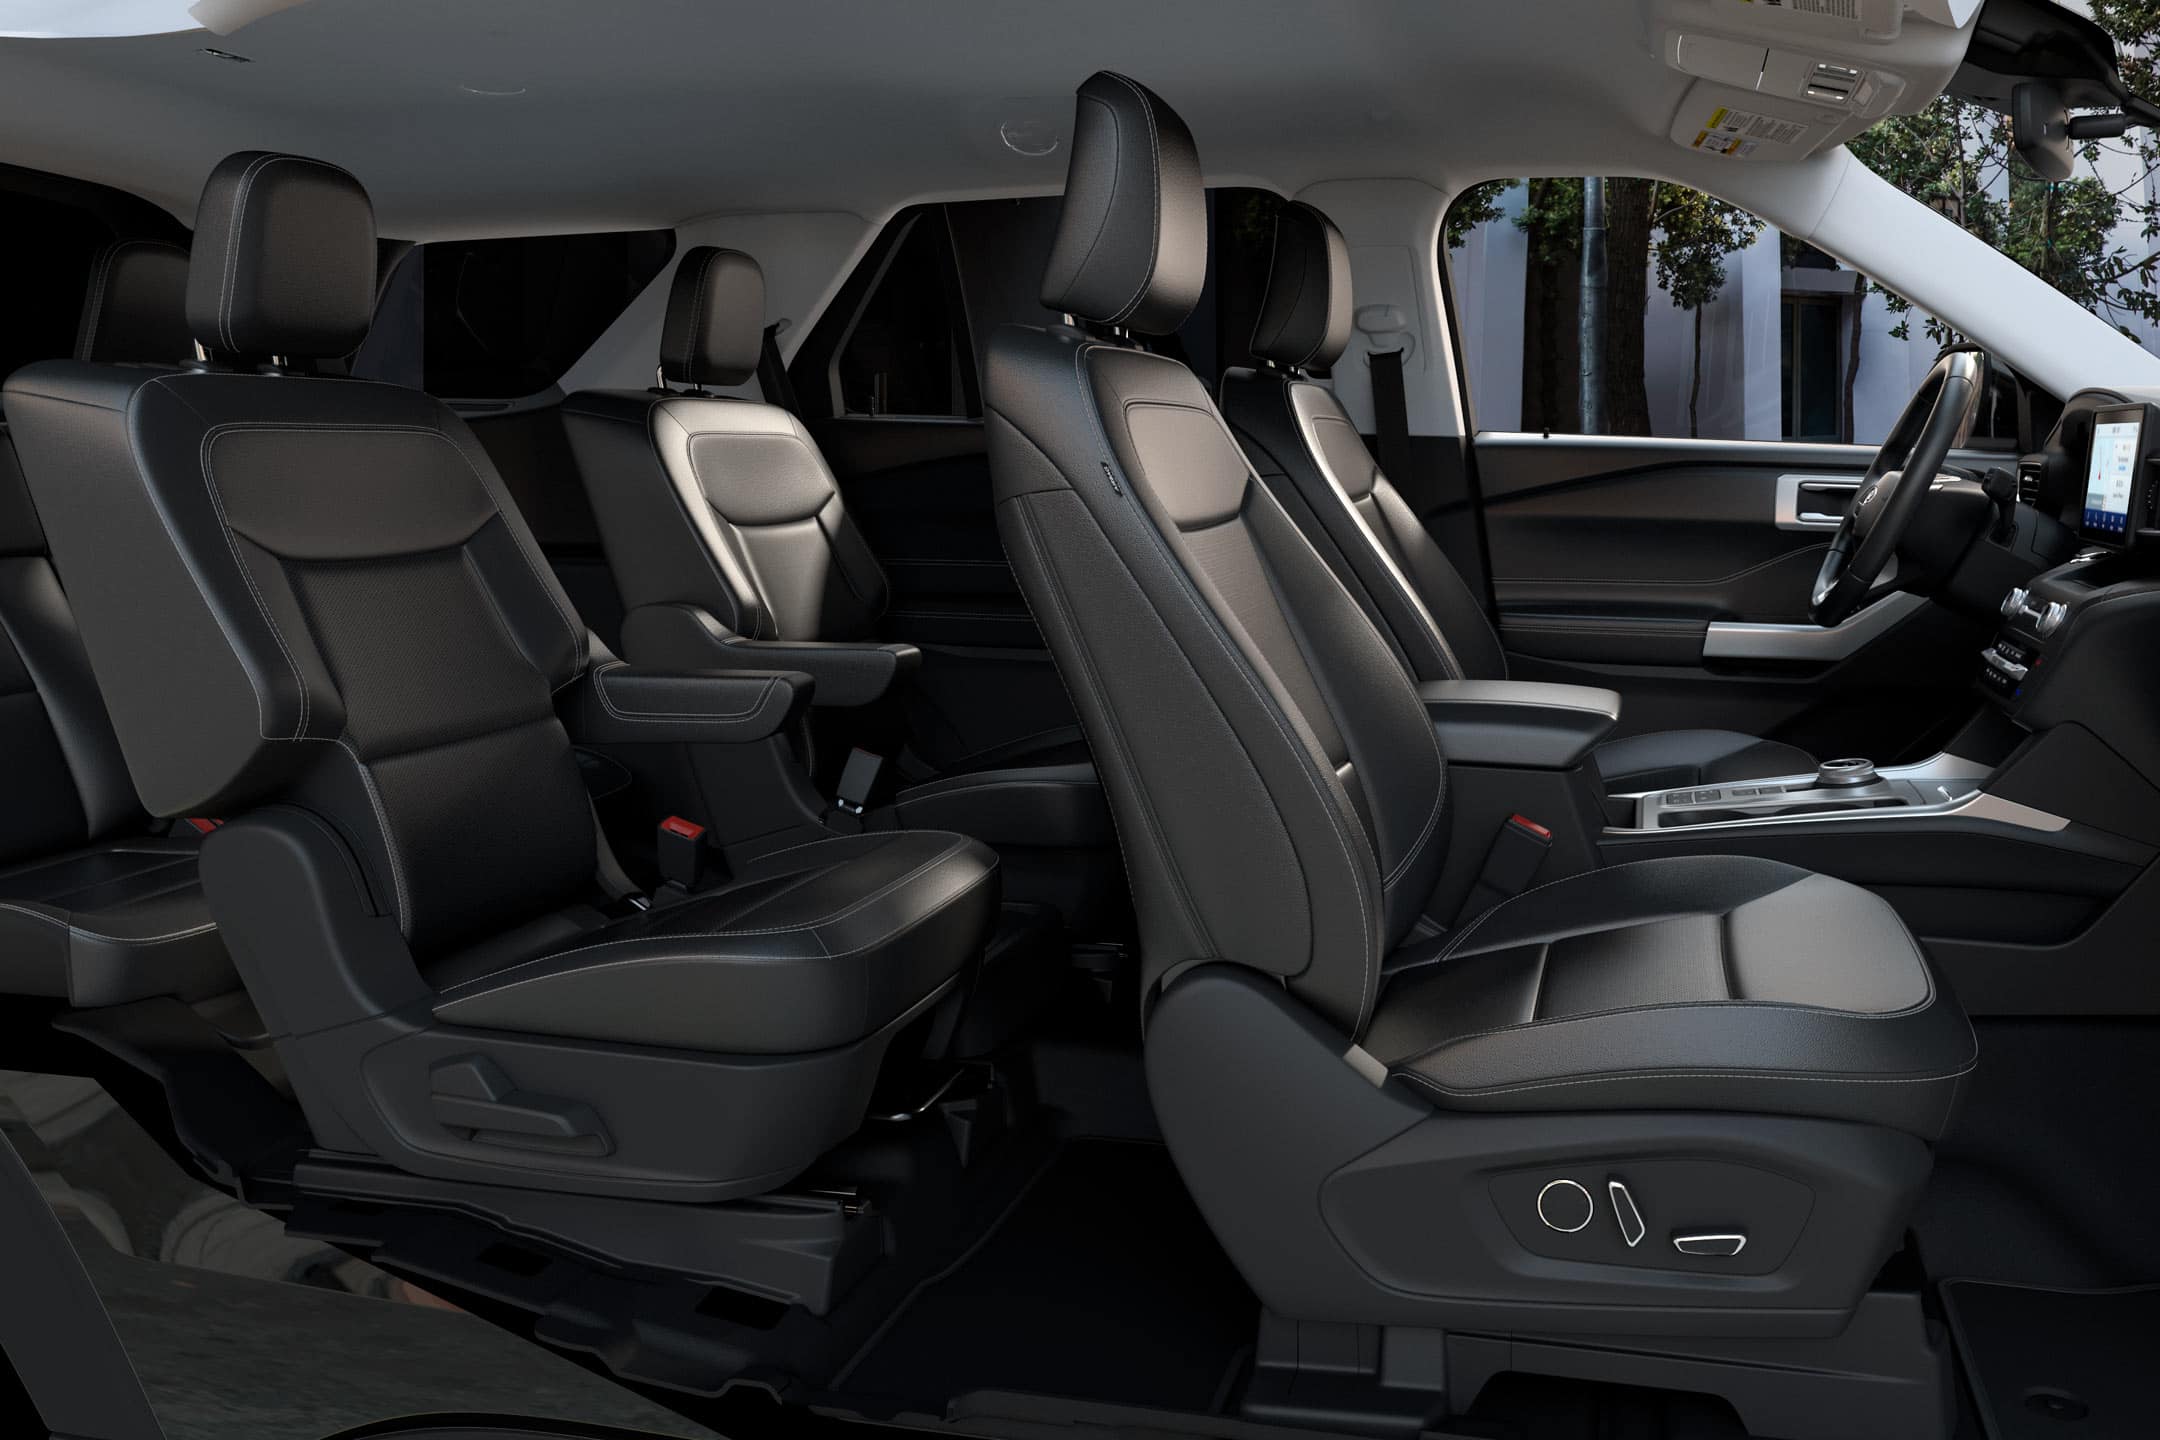 2023 Ford Explorer® SUV interior with leather seating